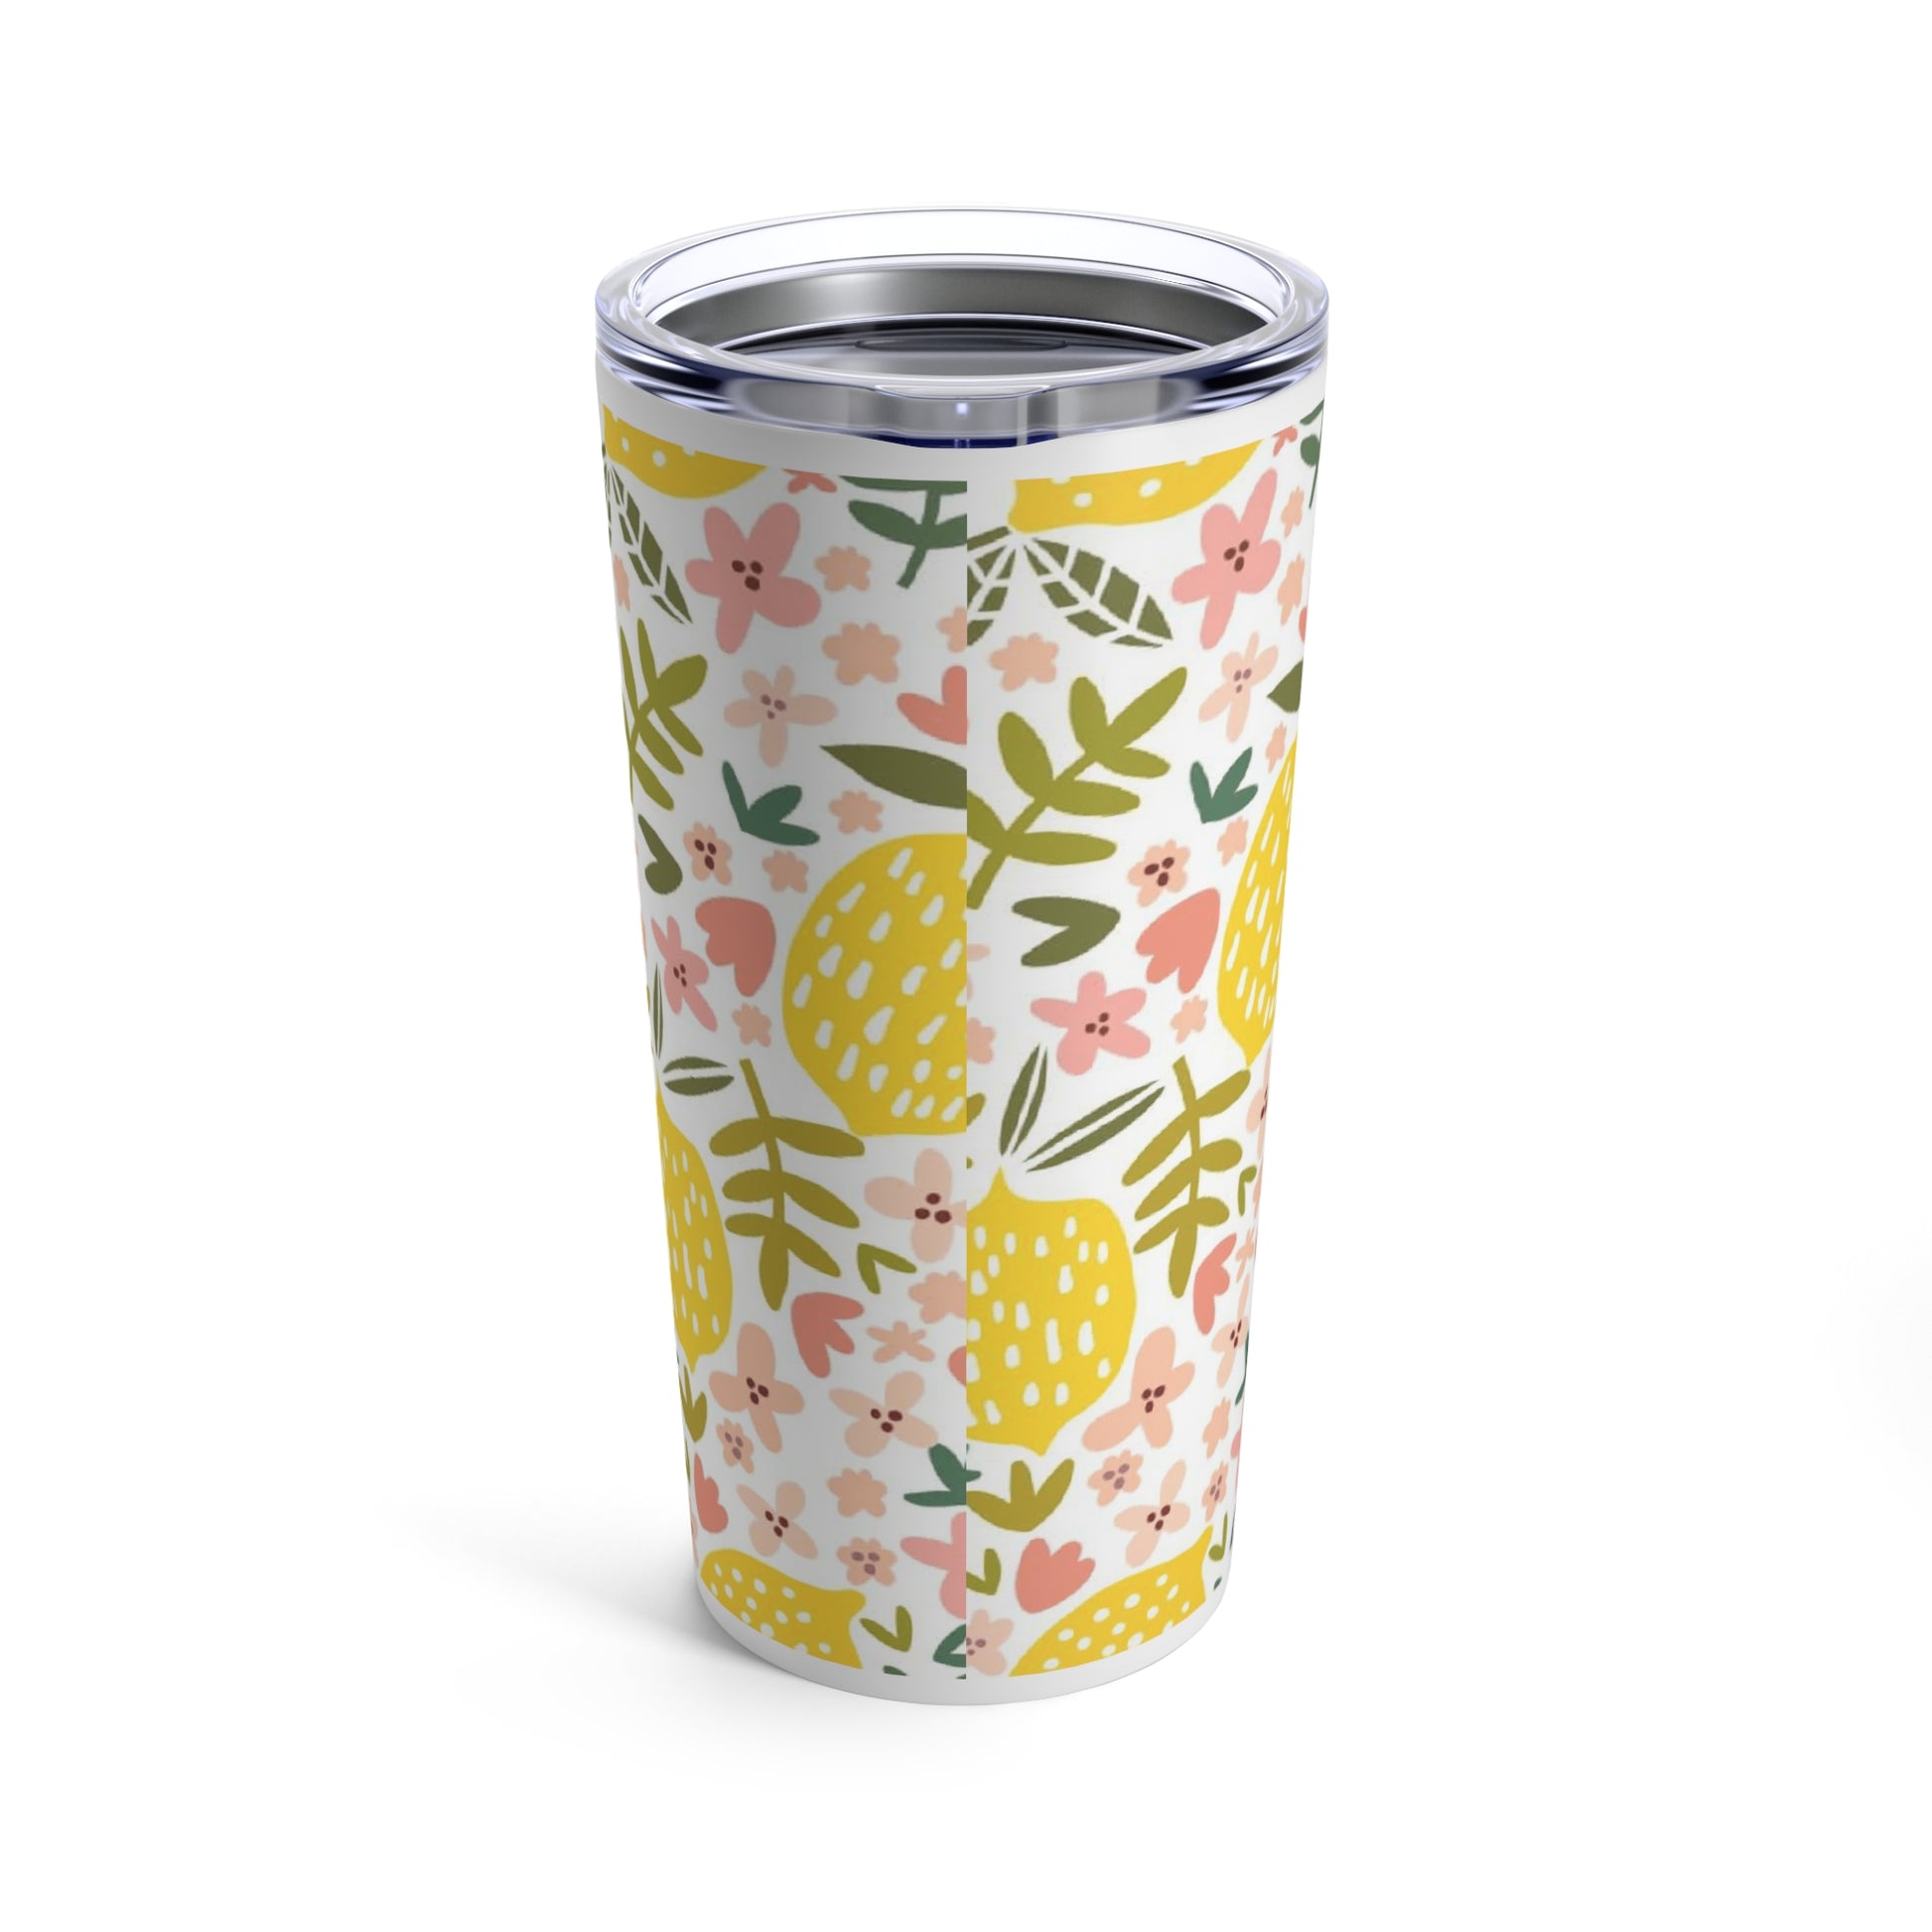 A Pink Lemon Tumbler by Printify: 20 oz.; Insulated; Stainless steel with a floral pattern on it, and is dishwasher-safe.